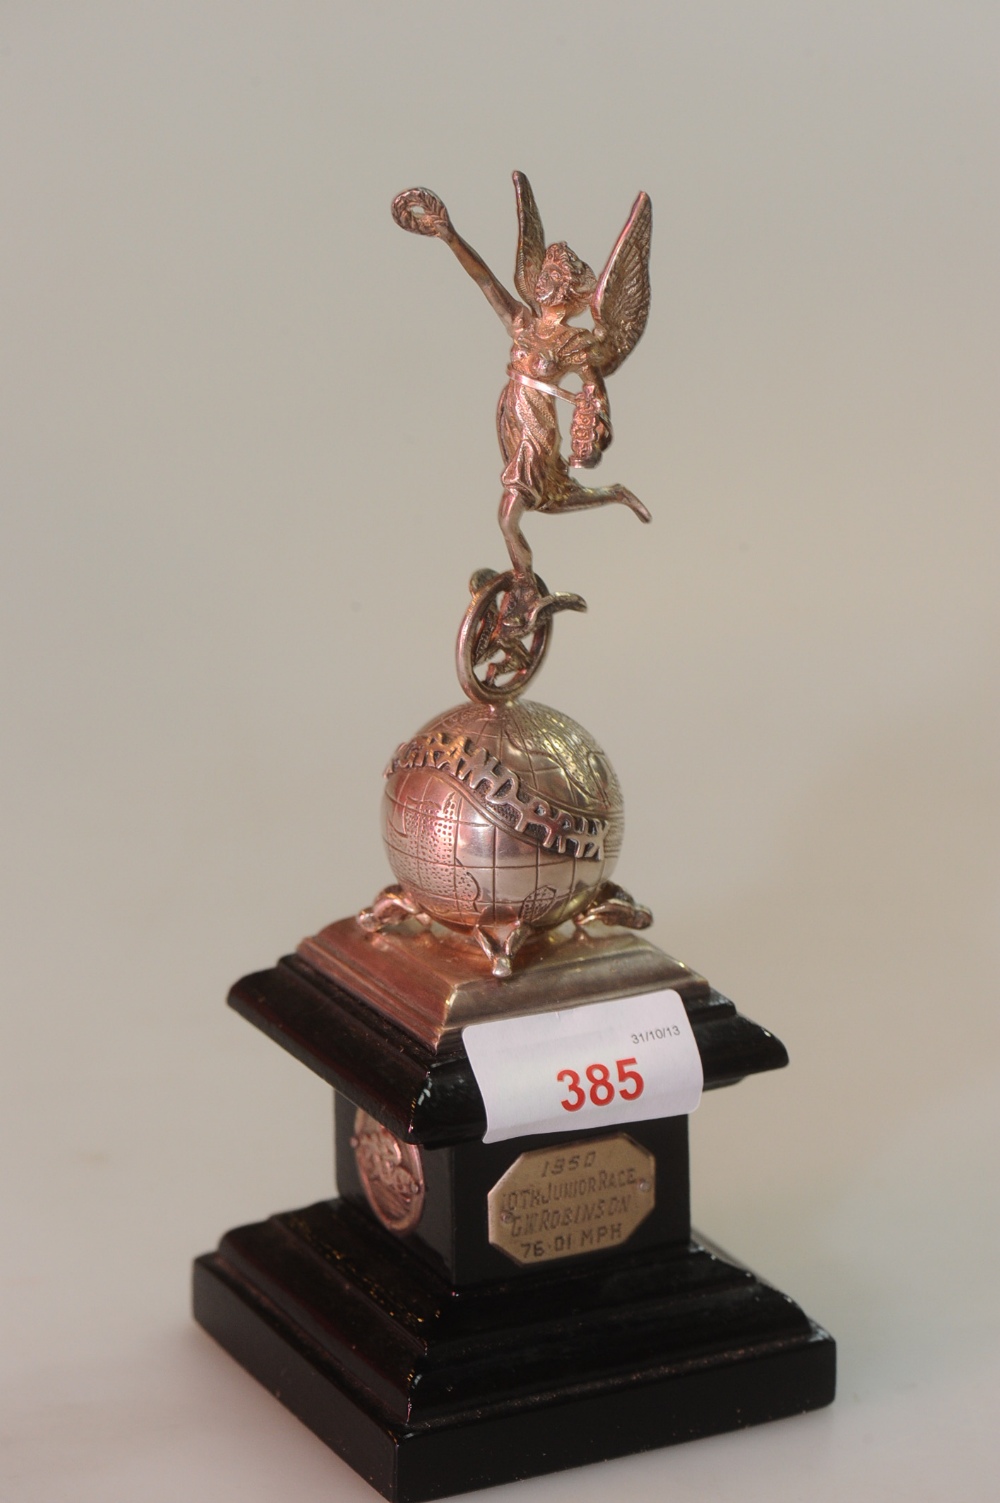 A silver (unmarked) junior trophy for the Manx Grand Prix, awarded to G.W. Robinson, 1950,with a